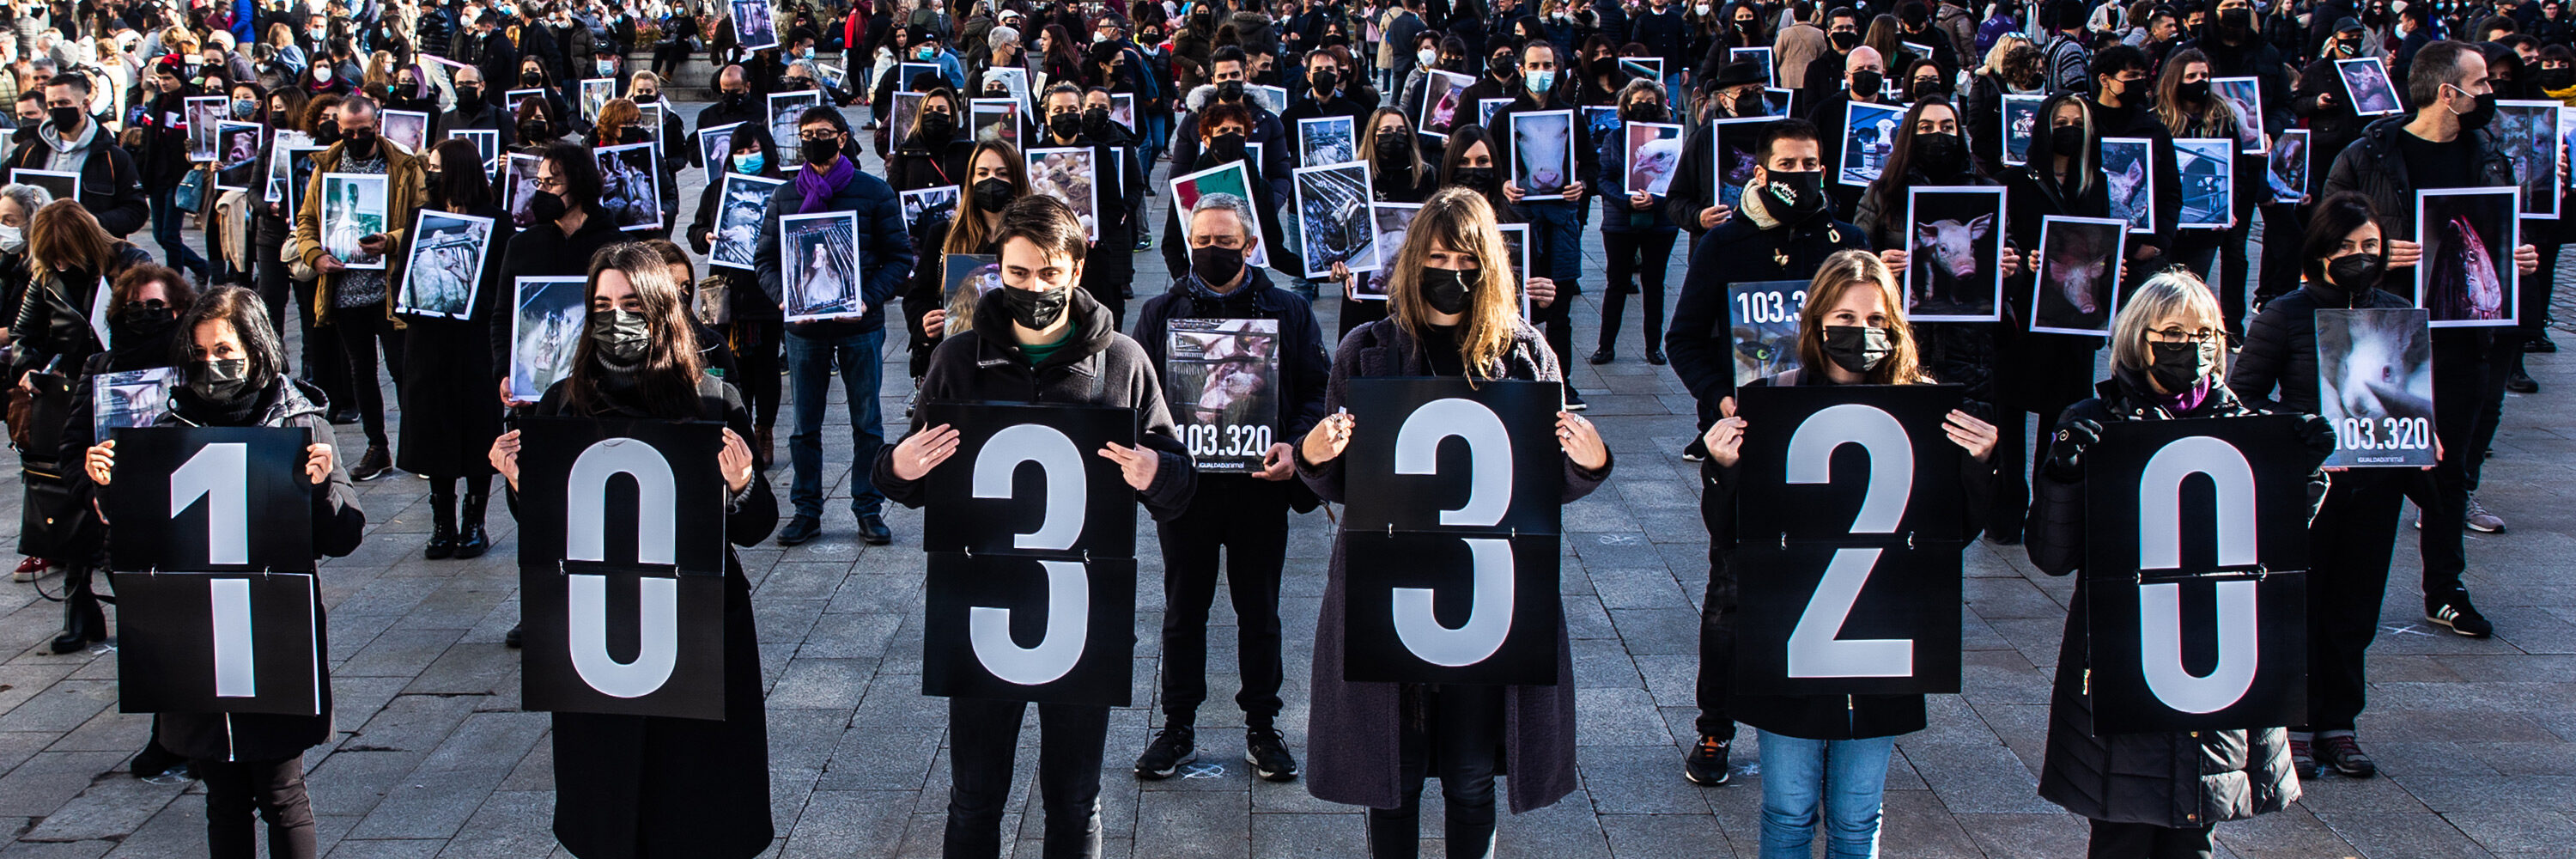 International Animal Rights Day protest in Madrid